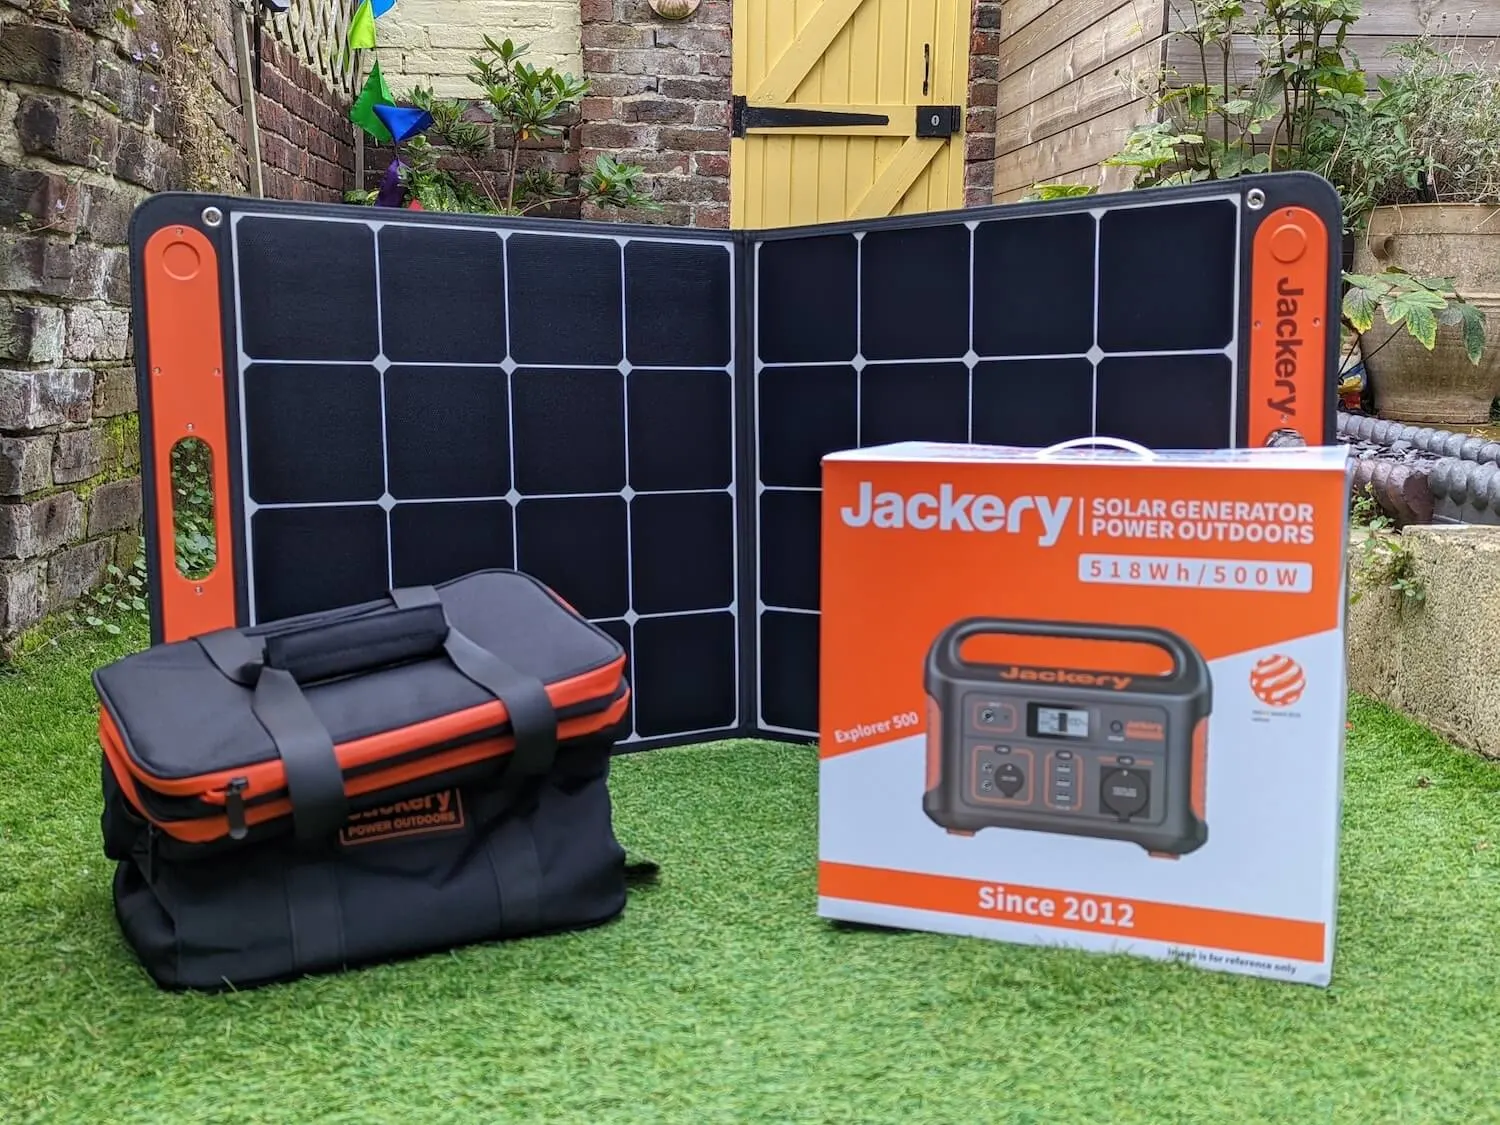 Jackery charger